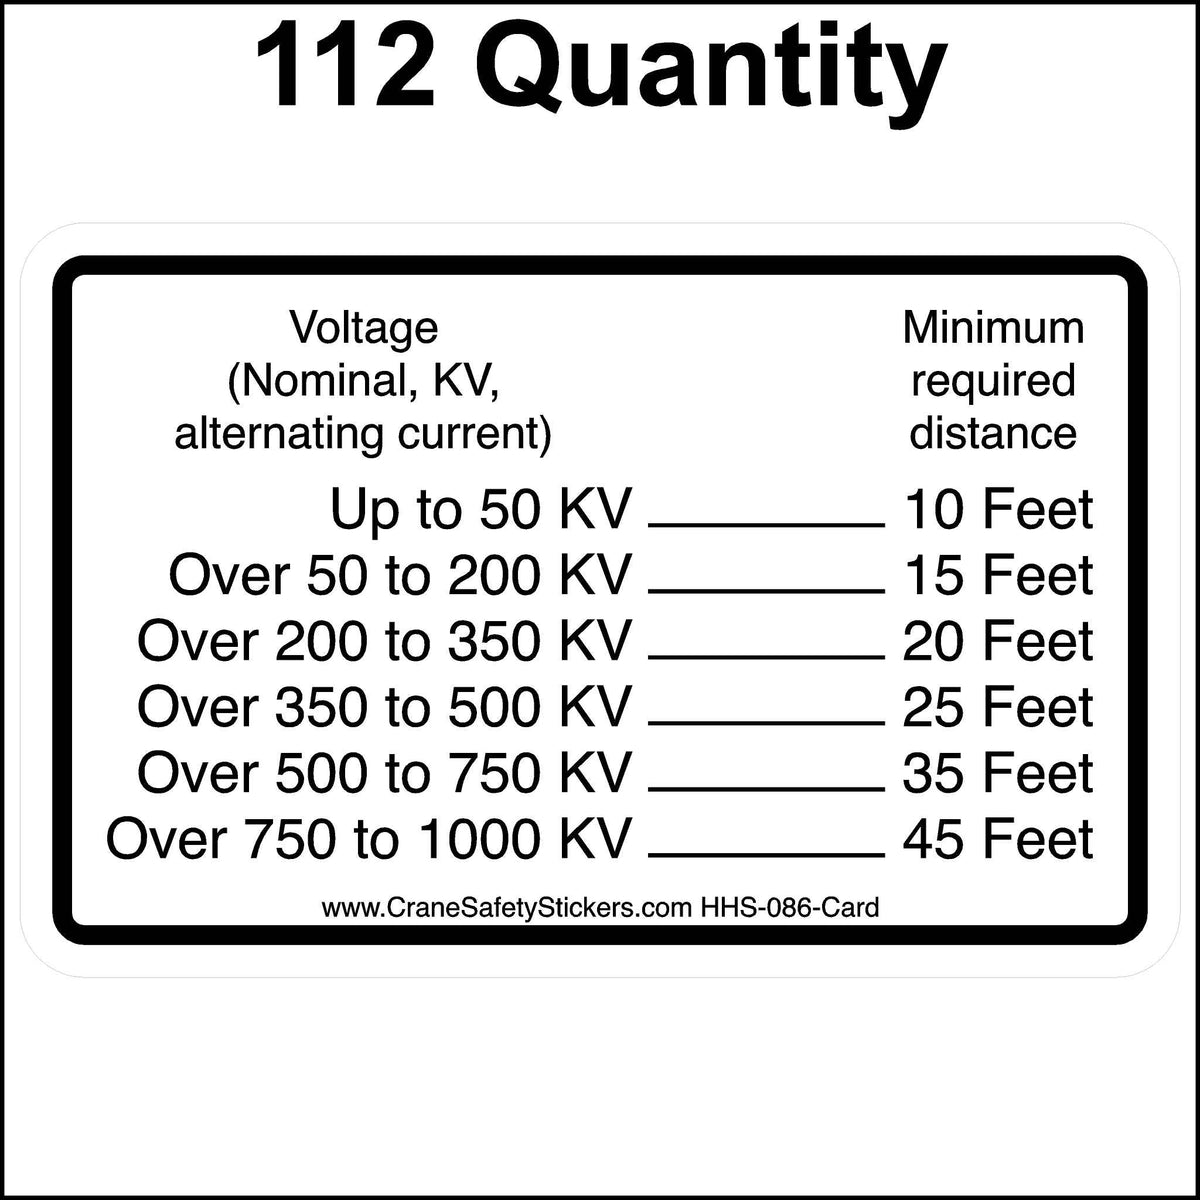 Powerline Clearance Requirements Card Sticker. 112 Quantity.